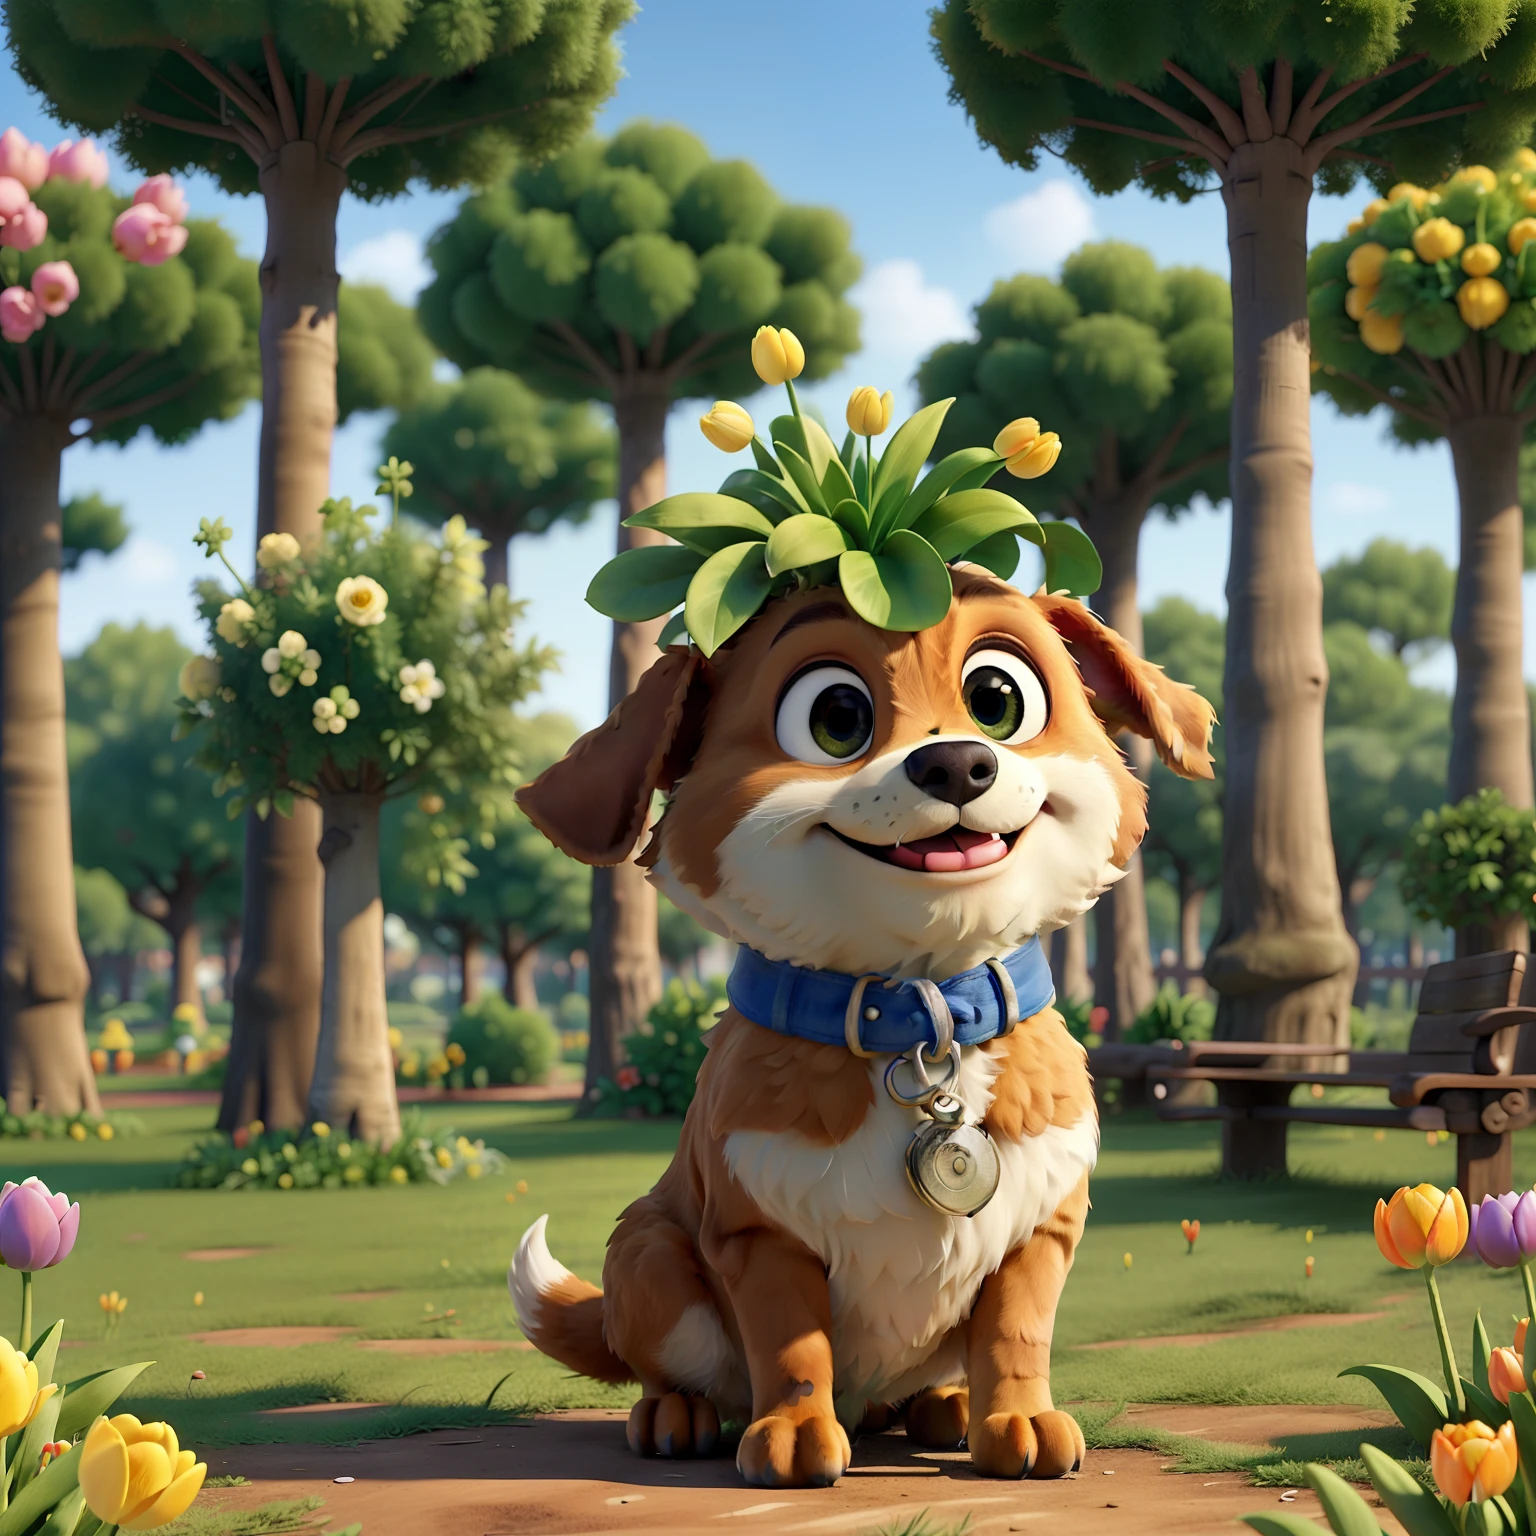 (Cute puppy:1.2), ssmile, Bushy and smooth coat、personification, Mushroom cap on the head, rendered:(charicature:1.3,Production Movie, the pose:(Lively:1.2, amusing), modeled:(ultra-quality:1.2,8K,Orthographic view),tulips, blue-sky, for the background(A park full of greenery:1.1),｛Complex and ultra-detailed, Giuseppe Arcimboldo｝